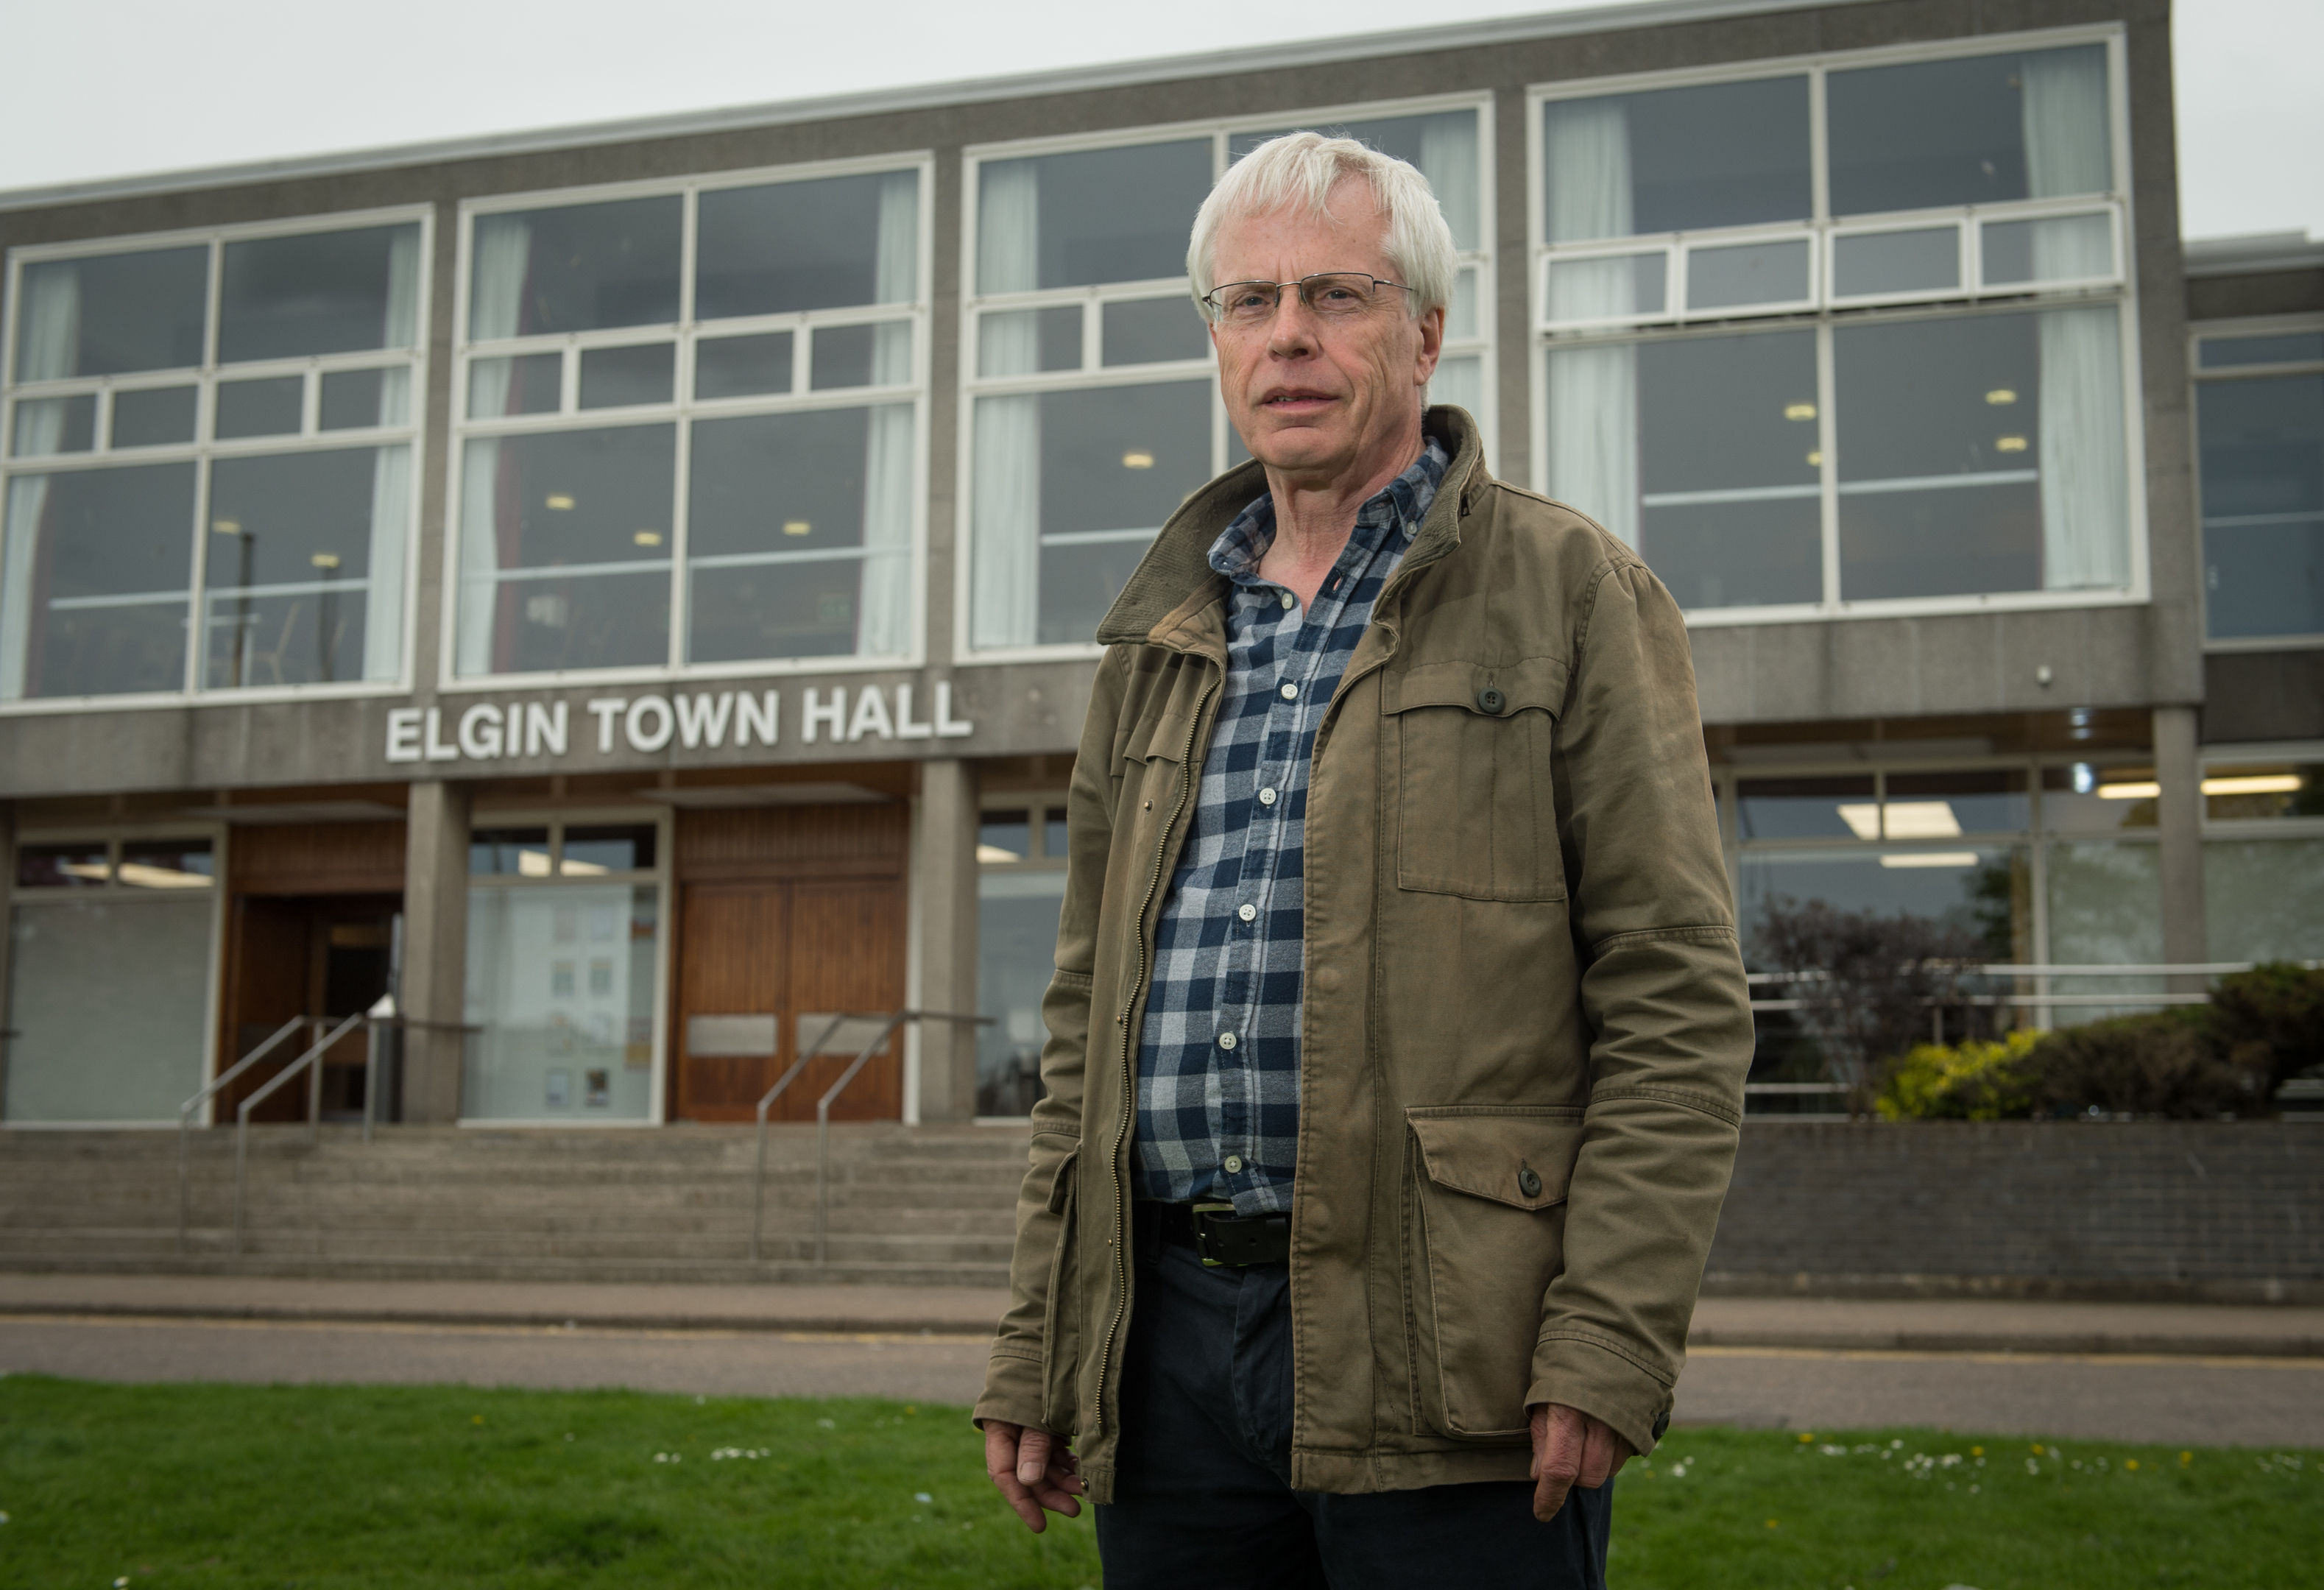 Mike Devenney, chairman of the Elgin Town Hall for the community working group, outside Elgin Town Hall